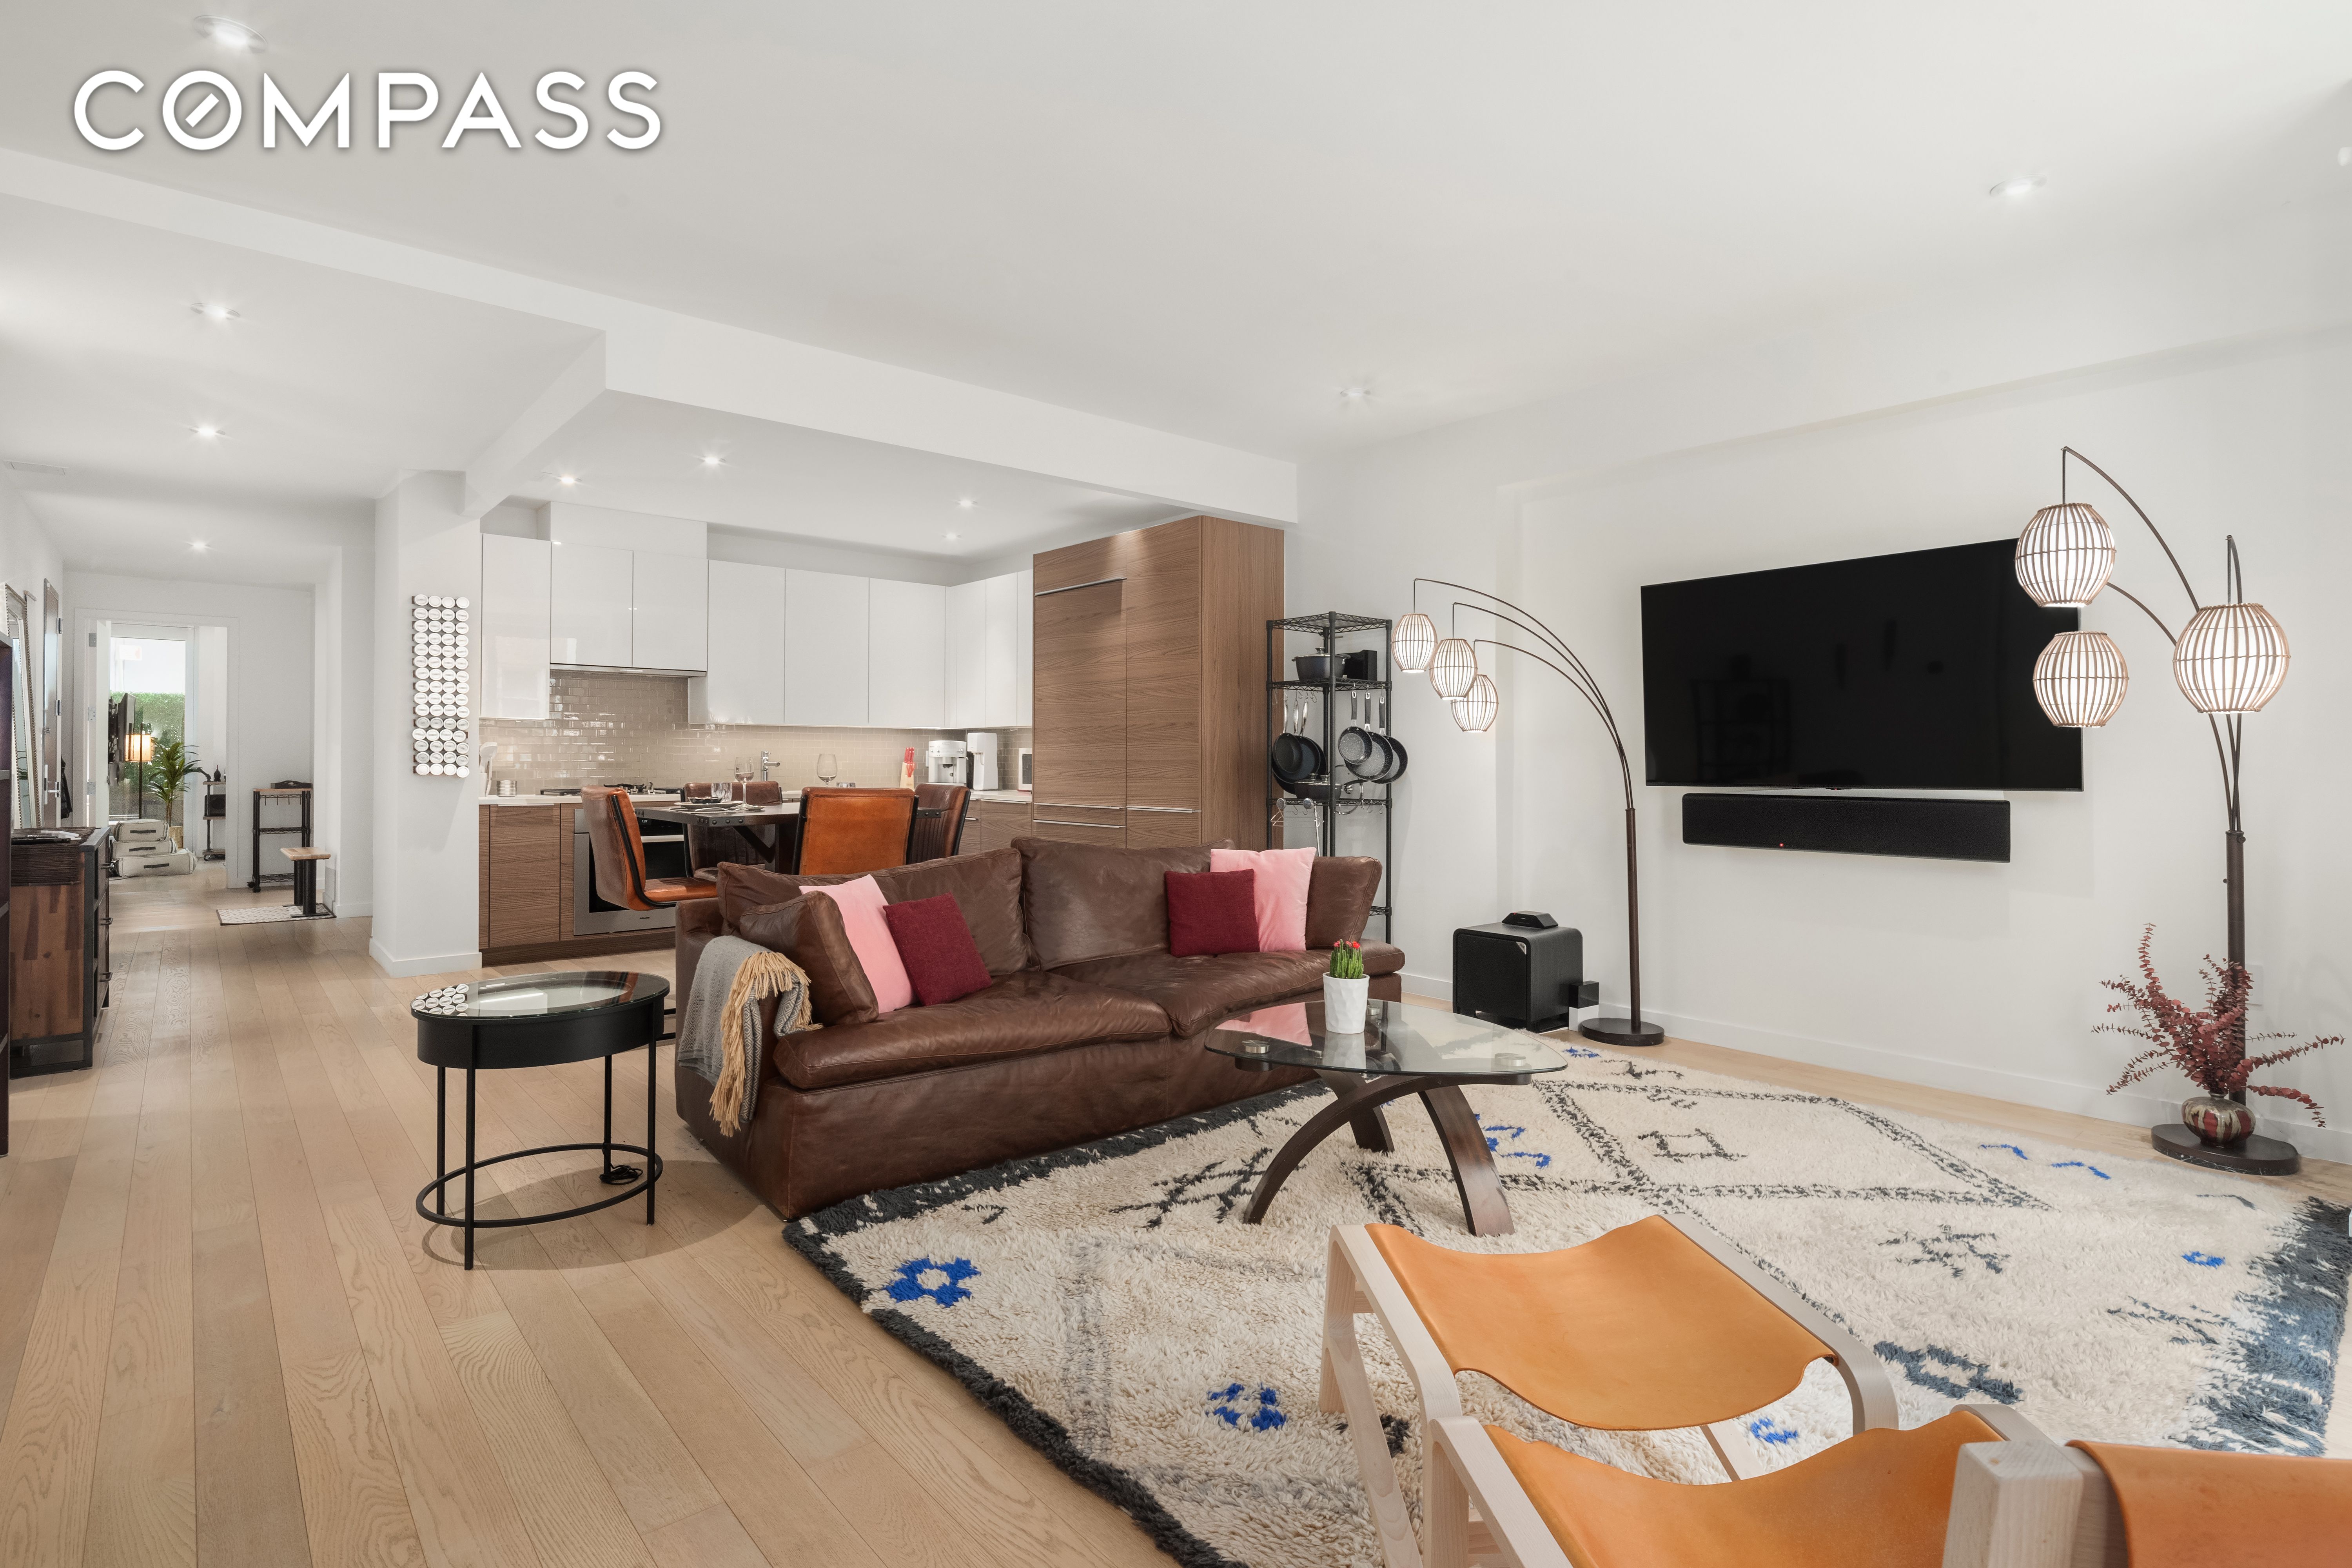 337 East 62nd Street 1A, Lenox Hill, Upper East Side, NYC - 3 Bedrooms  
2.5 Bathrooms  
6 Rooms - 